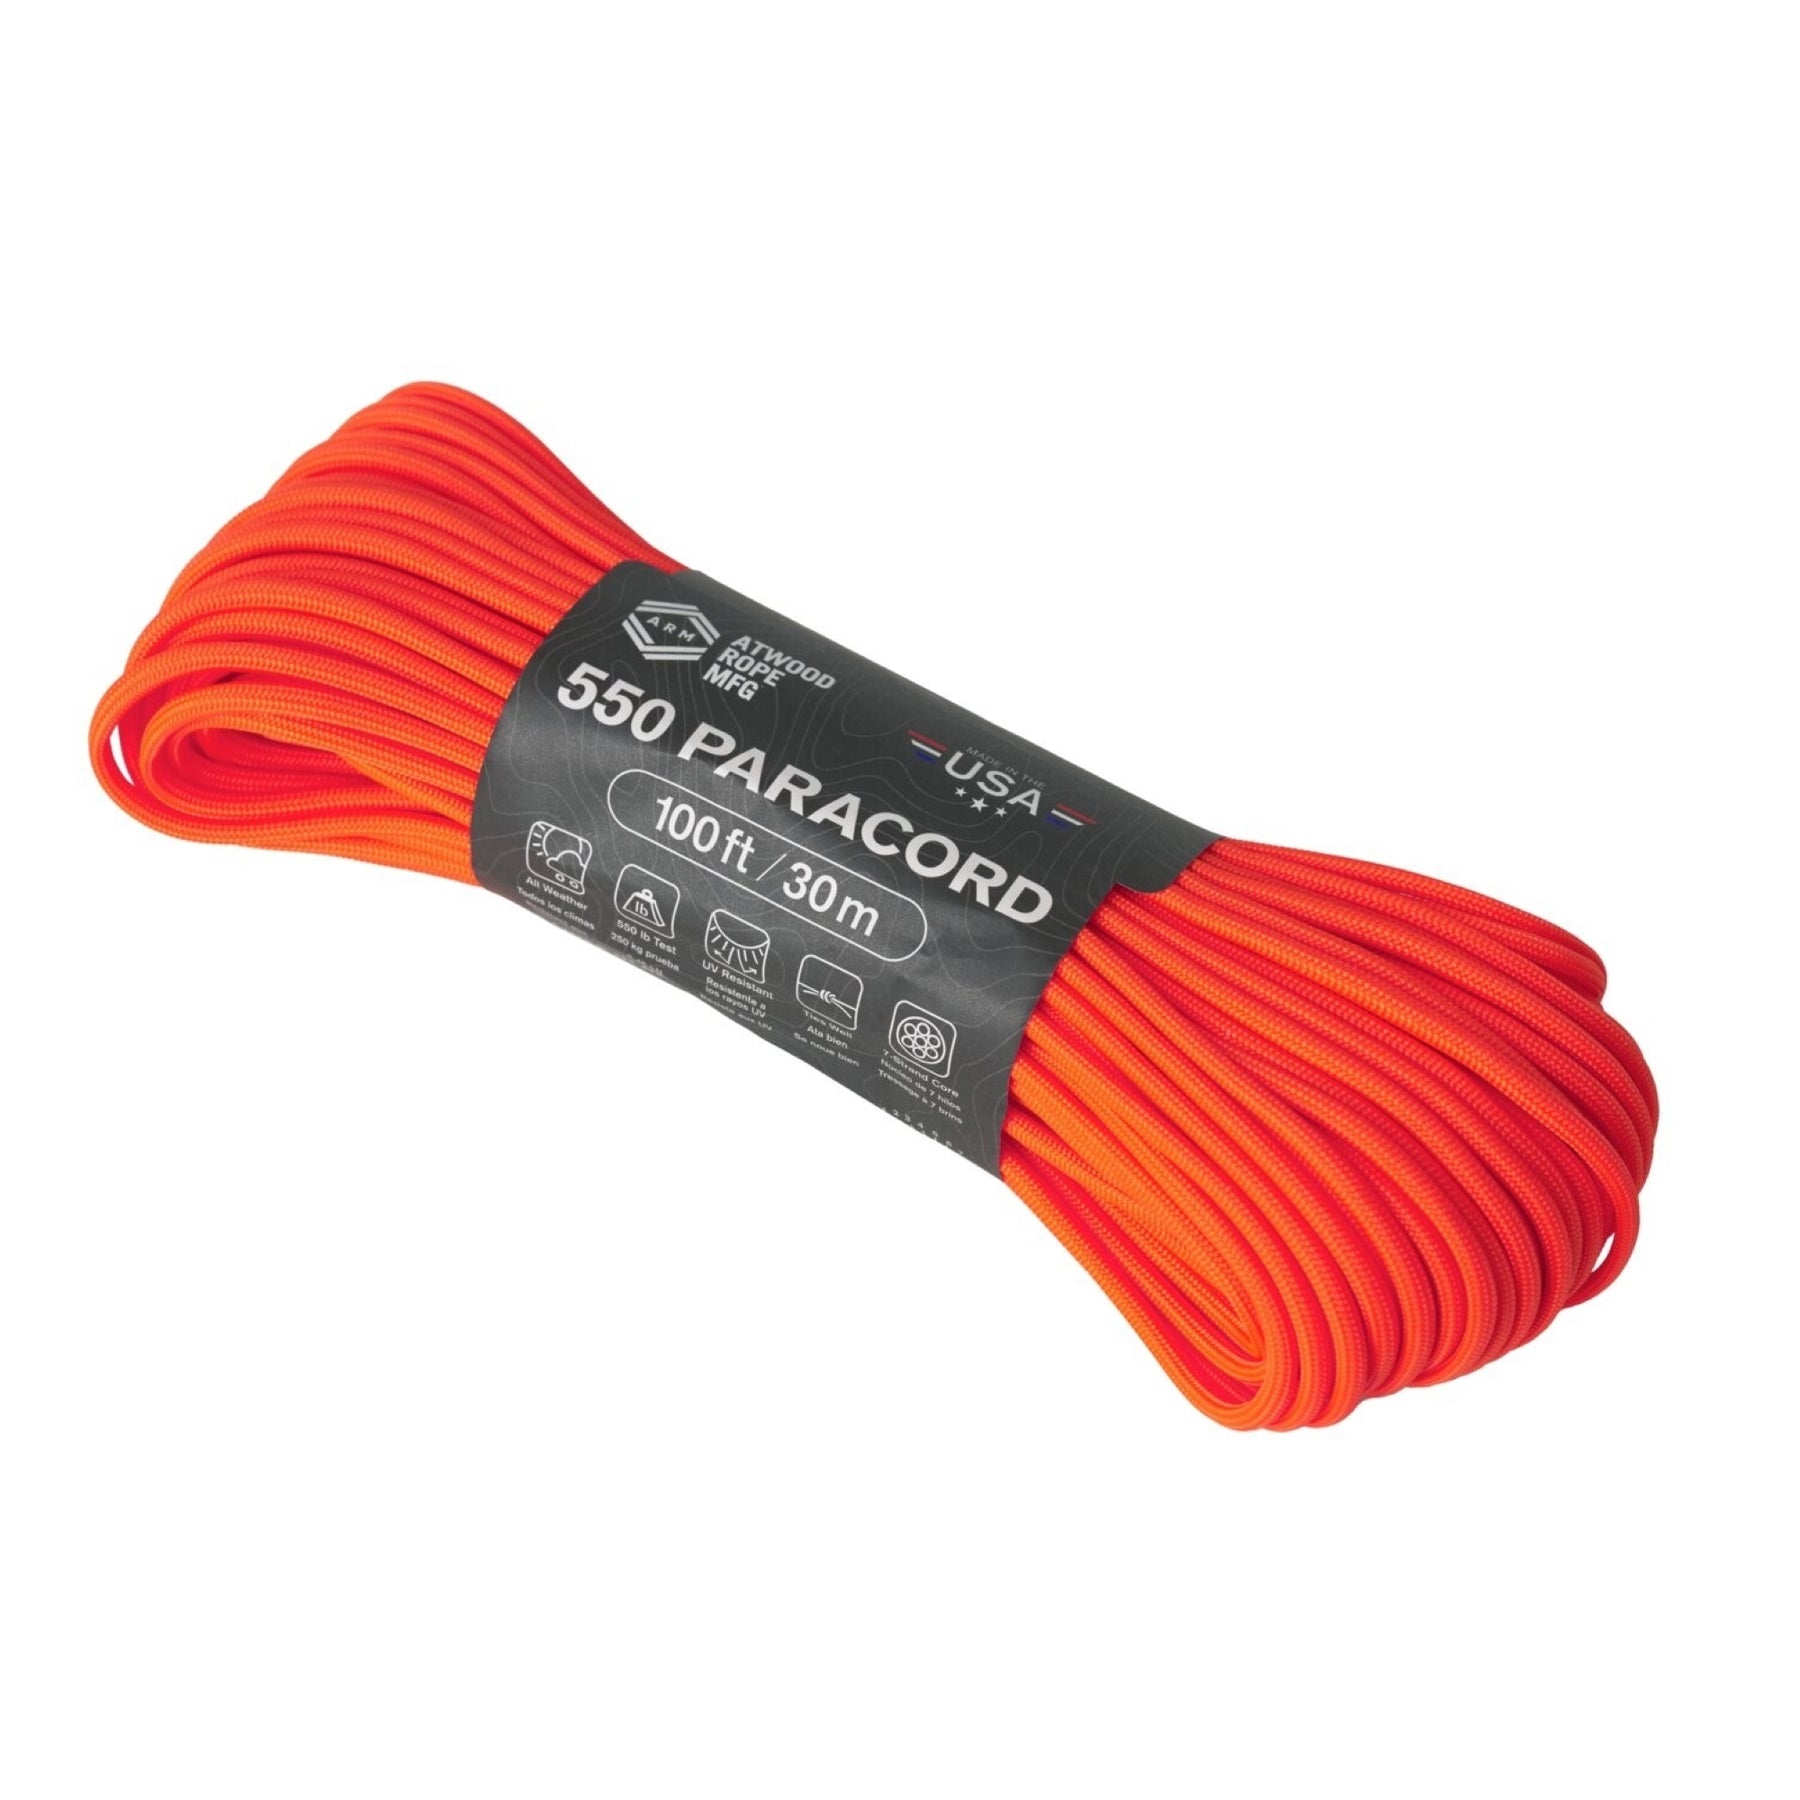 550 PARACORD 30 METRI - ATWOOD MADE IN USA